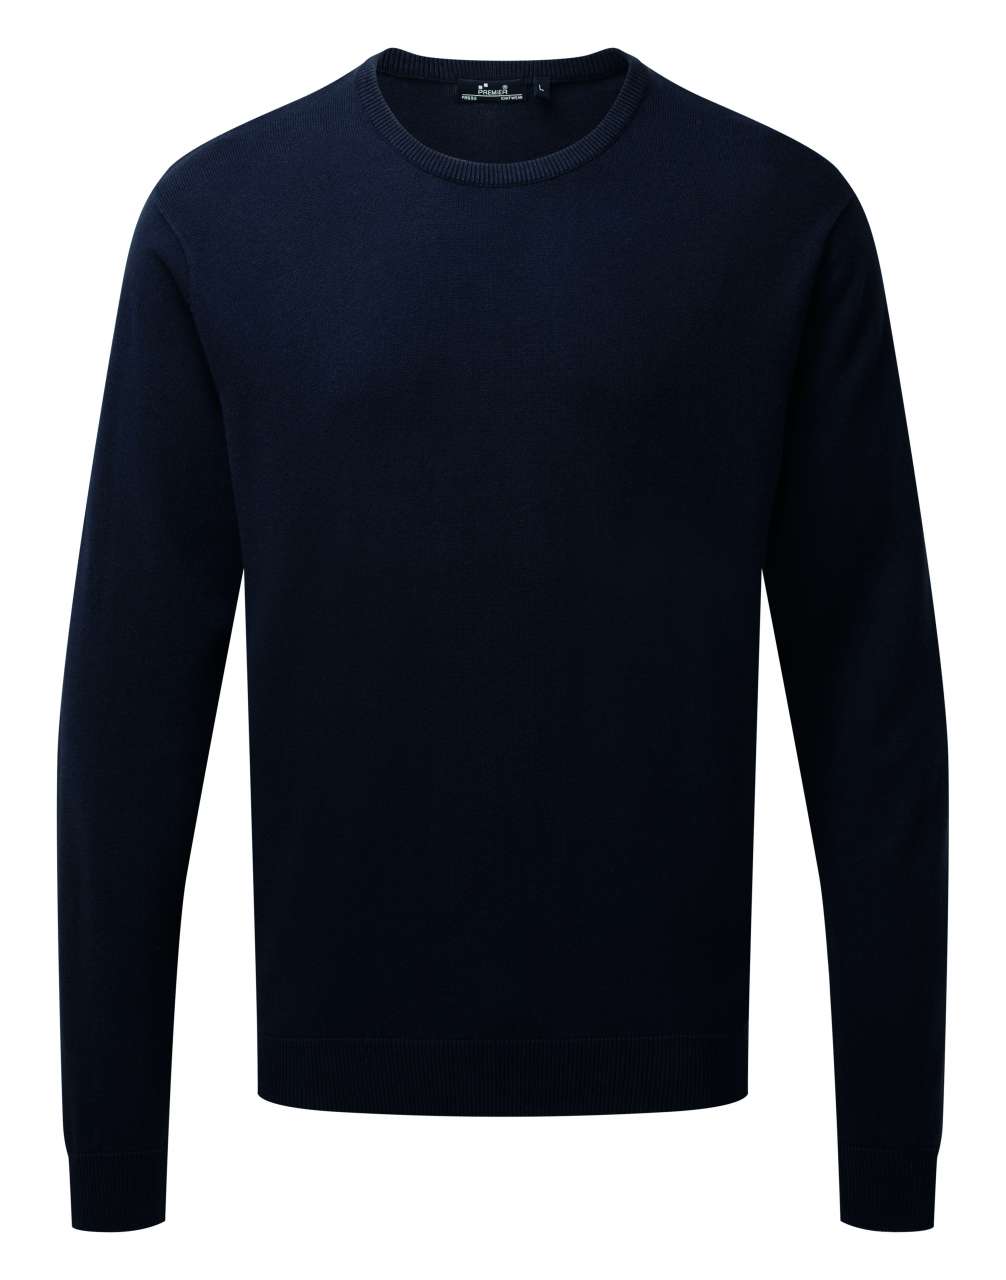 MEN'S CREW NECK COTTON RICH KNITTED SWEATER